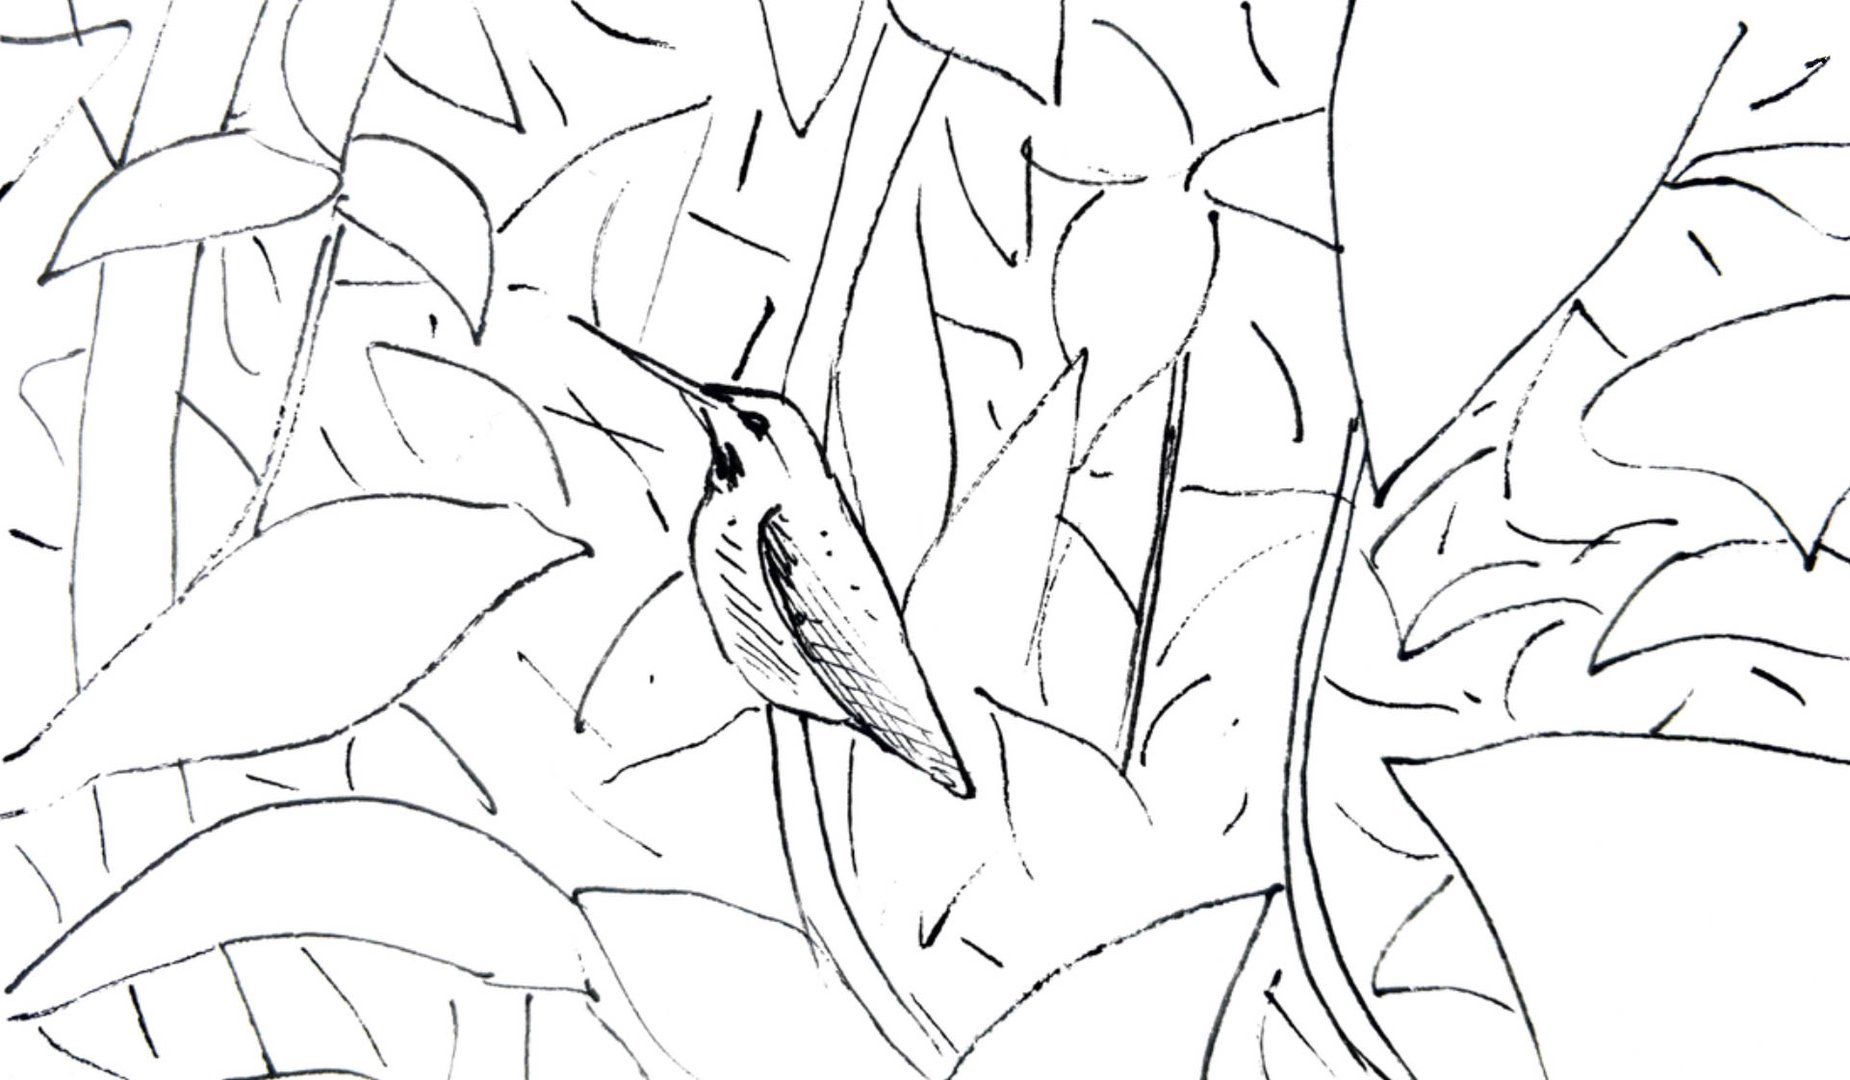 Bird standing surrounded by leaves in black on white systems7.jpg